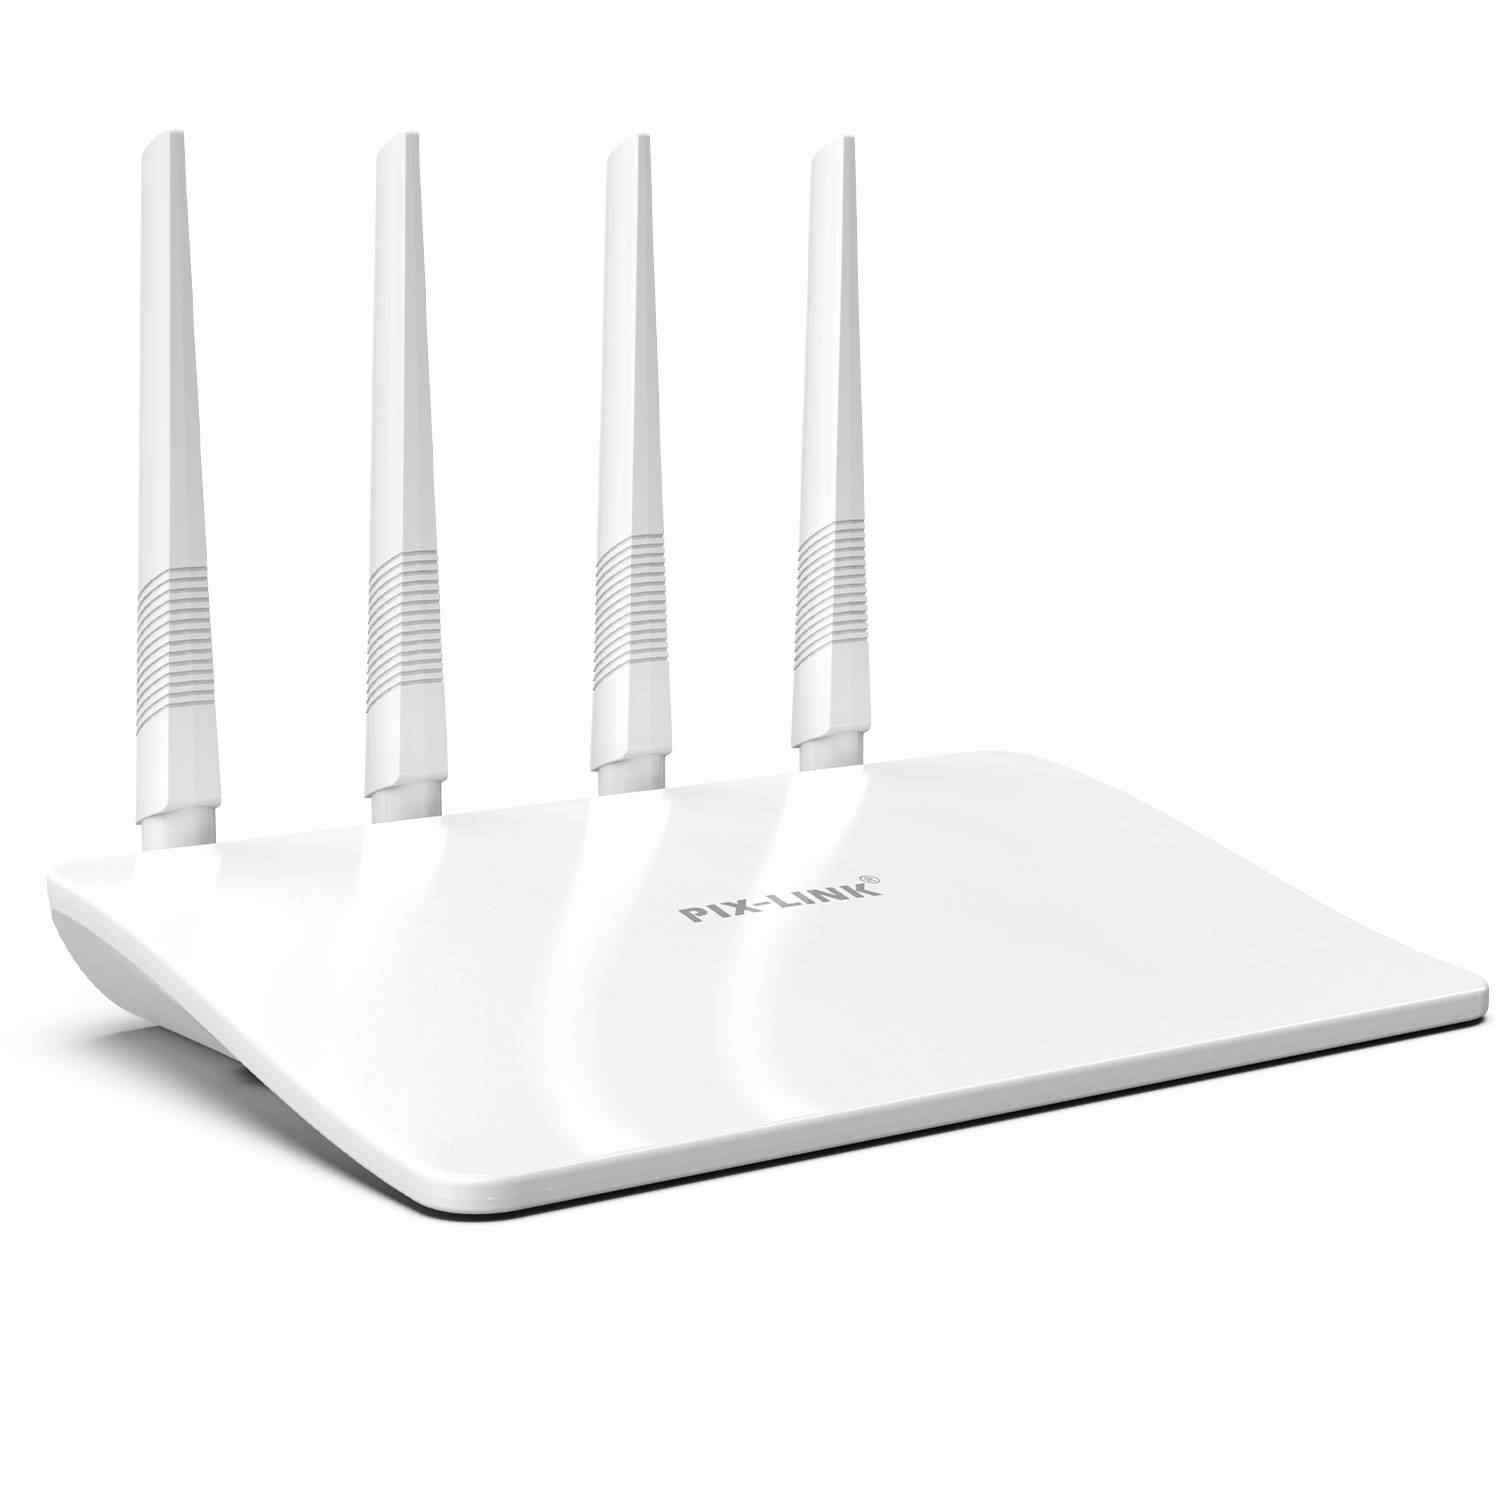 Pix-Link LV-WR21Q New Arrival 300Mbps 4Anten Home High Gain Wi-Fi Router,Access Point,Repeater